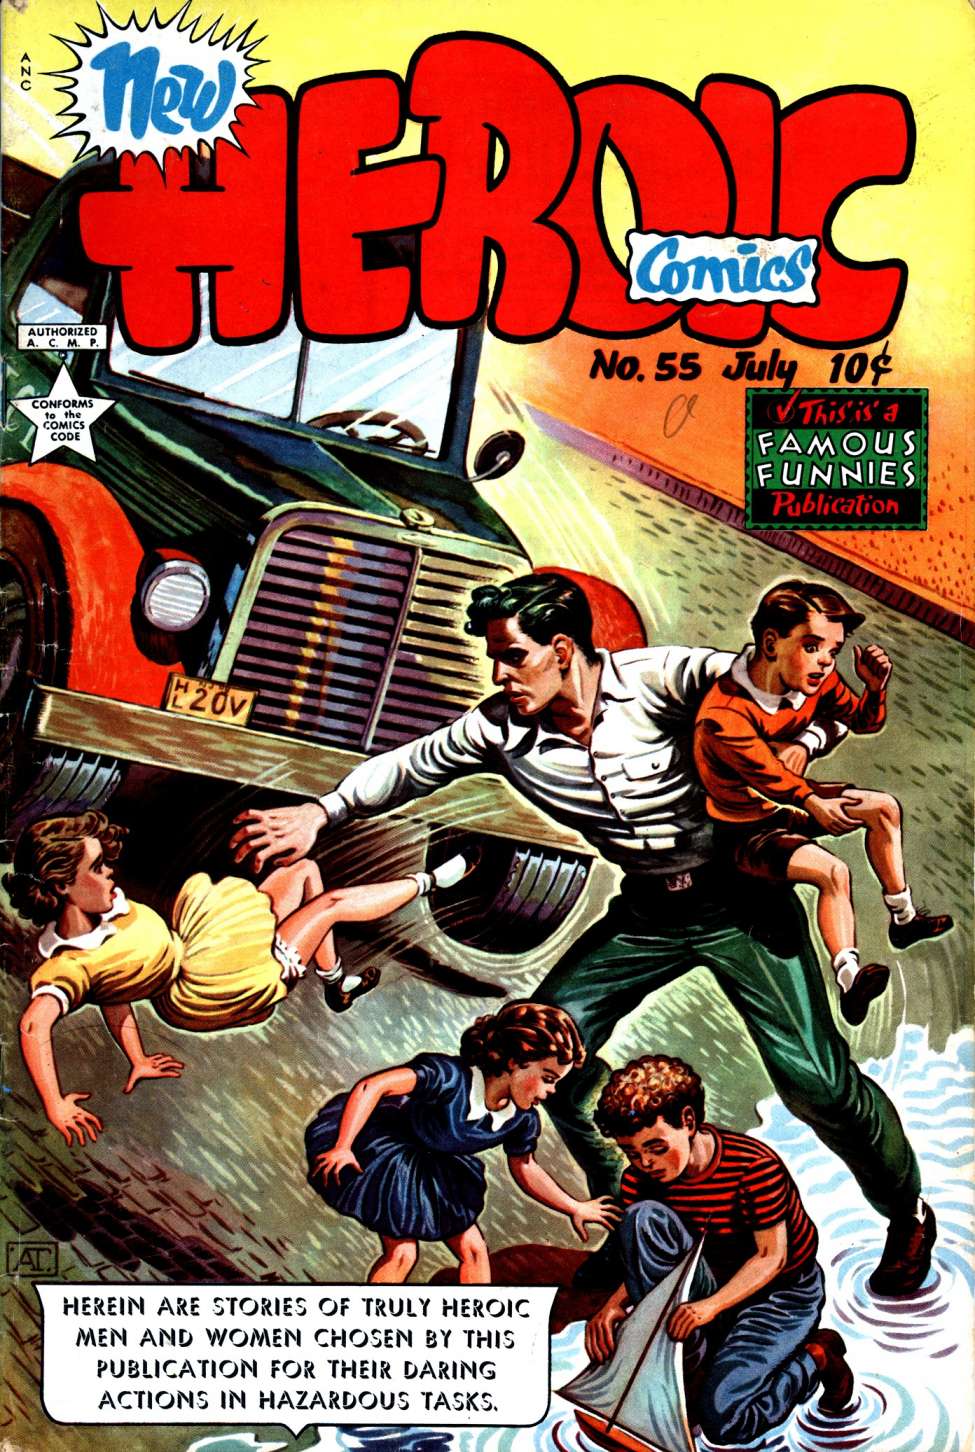 Book Cover For Heroic Comics 55